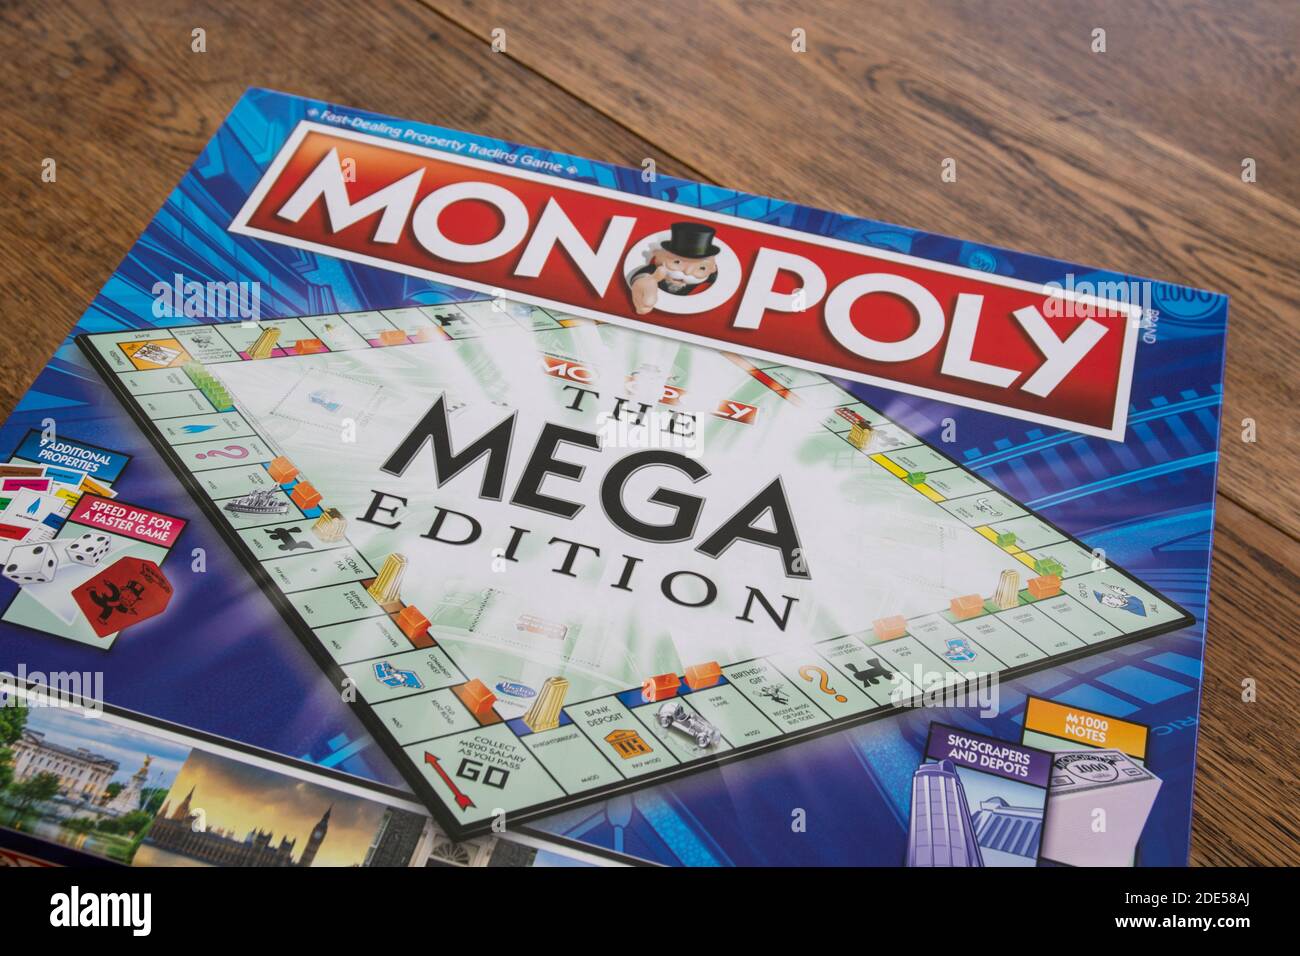 Durham, UK - 17th Nov 2020: Newley released Mega Edition Monopoly. New twist on classic fast-dealing property trading board game (Hasbro games). Finan Stock Photo